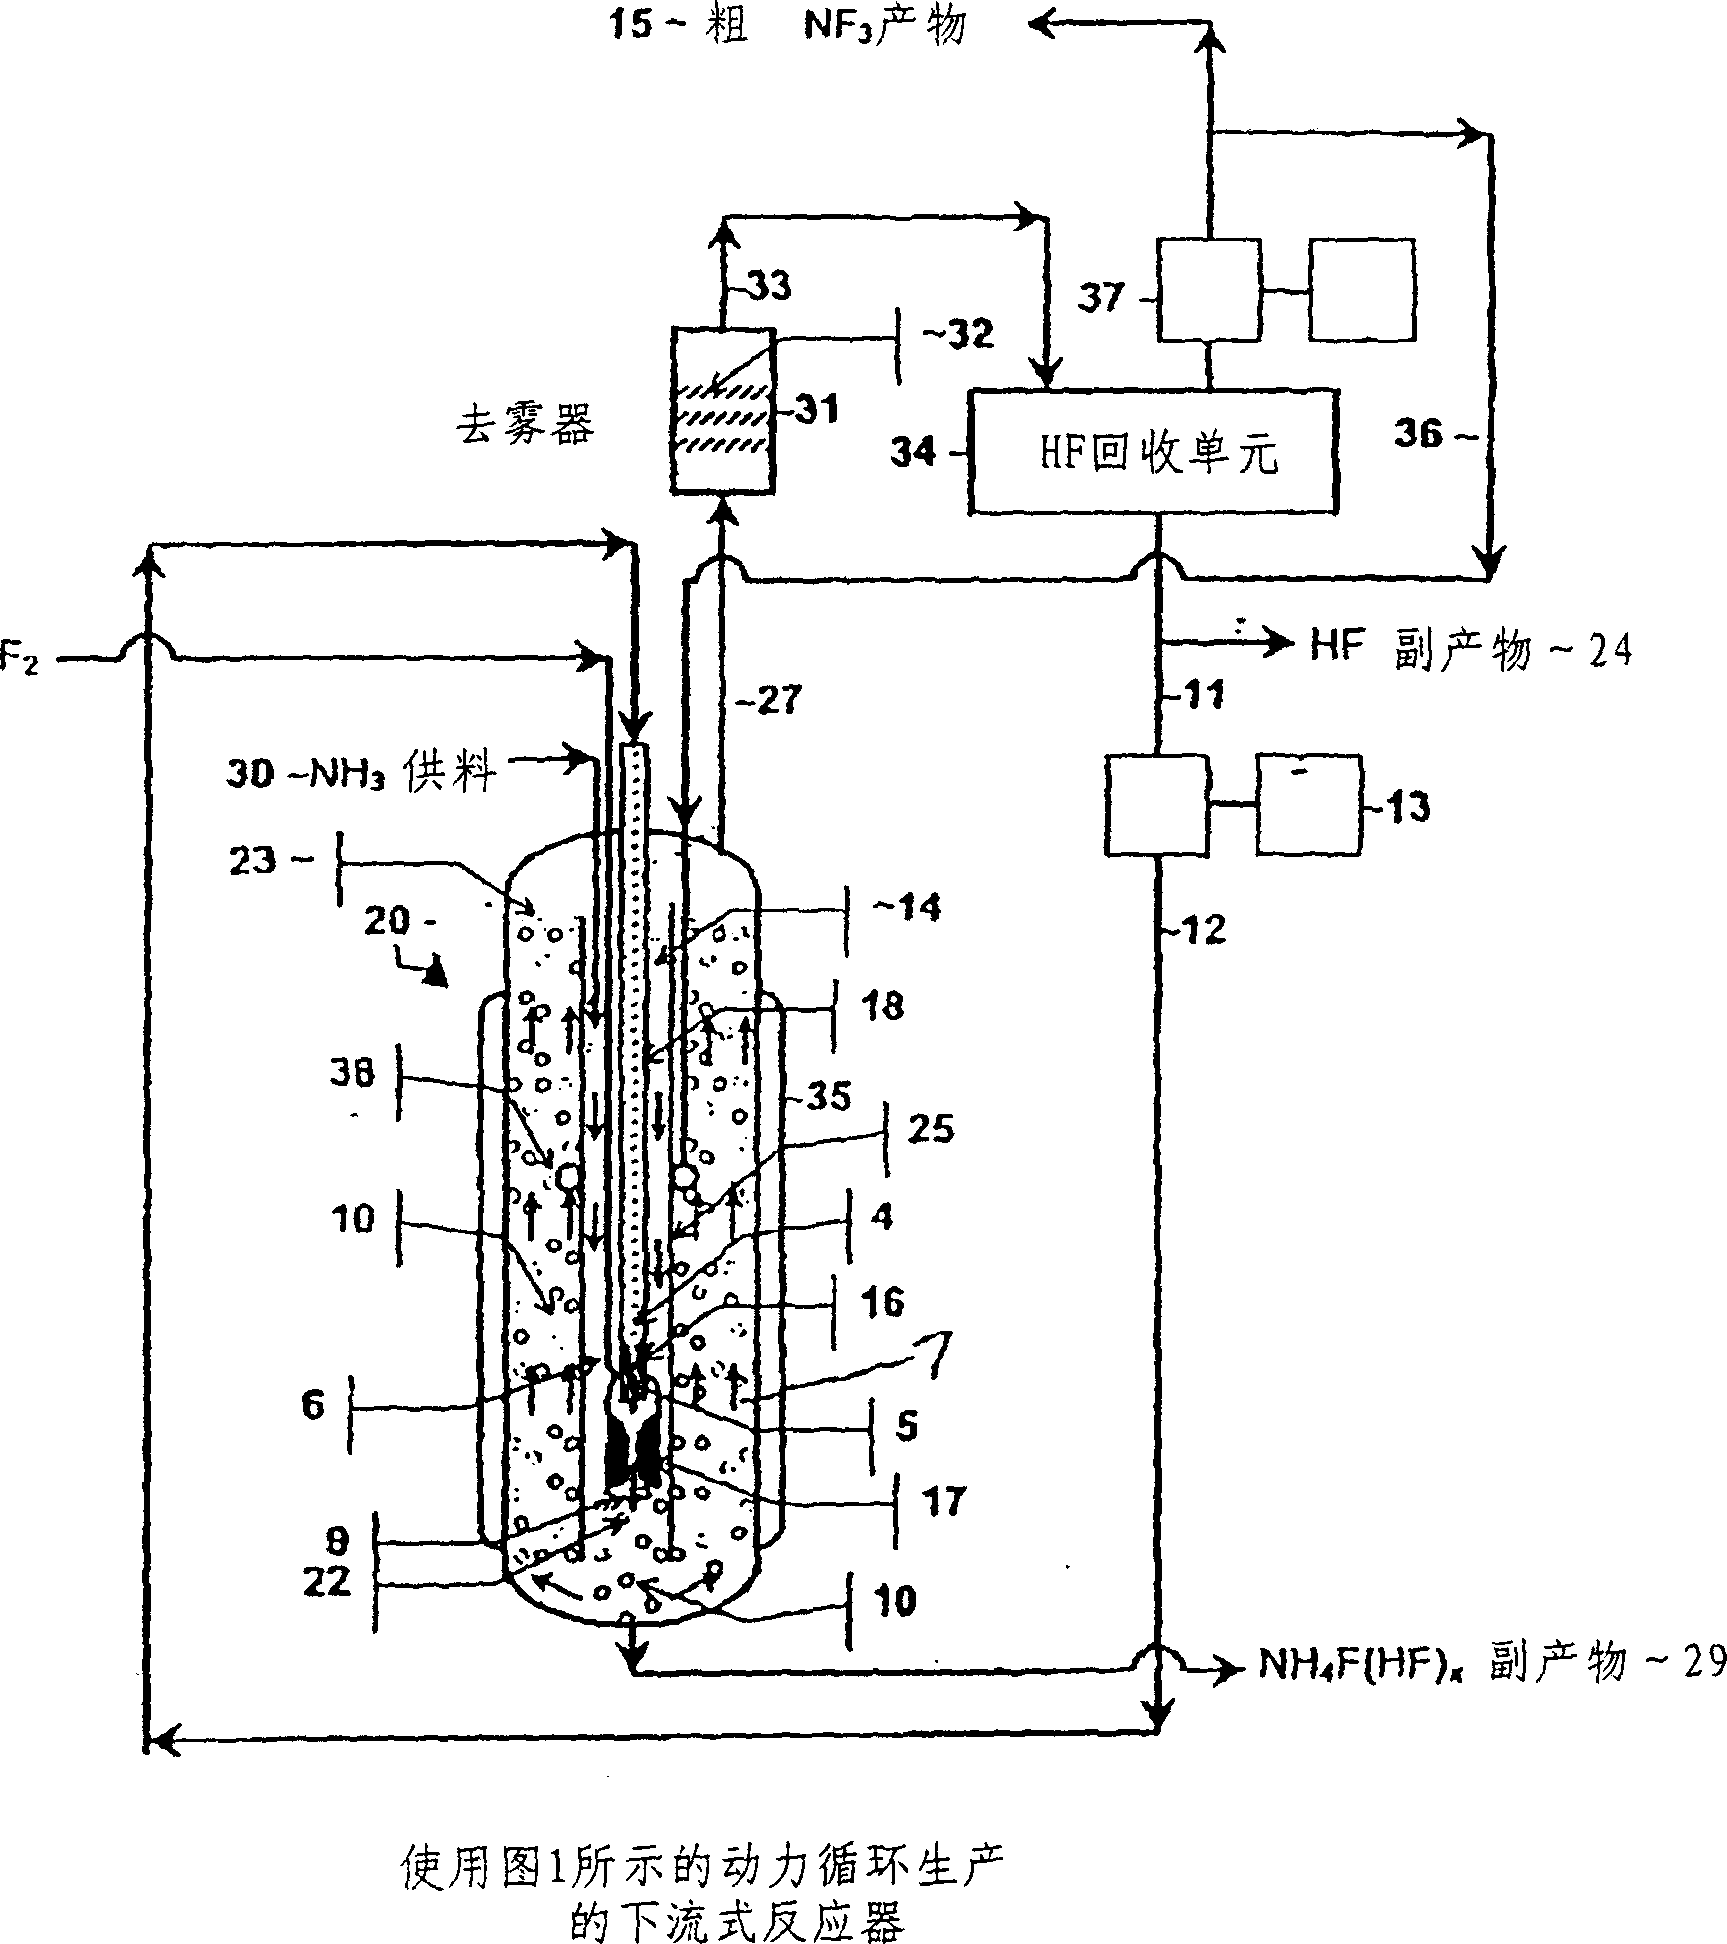 Method and apparatus for producing nitrogen trifluoride